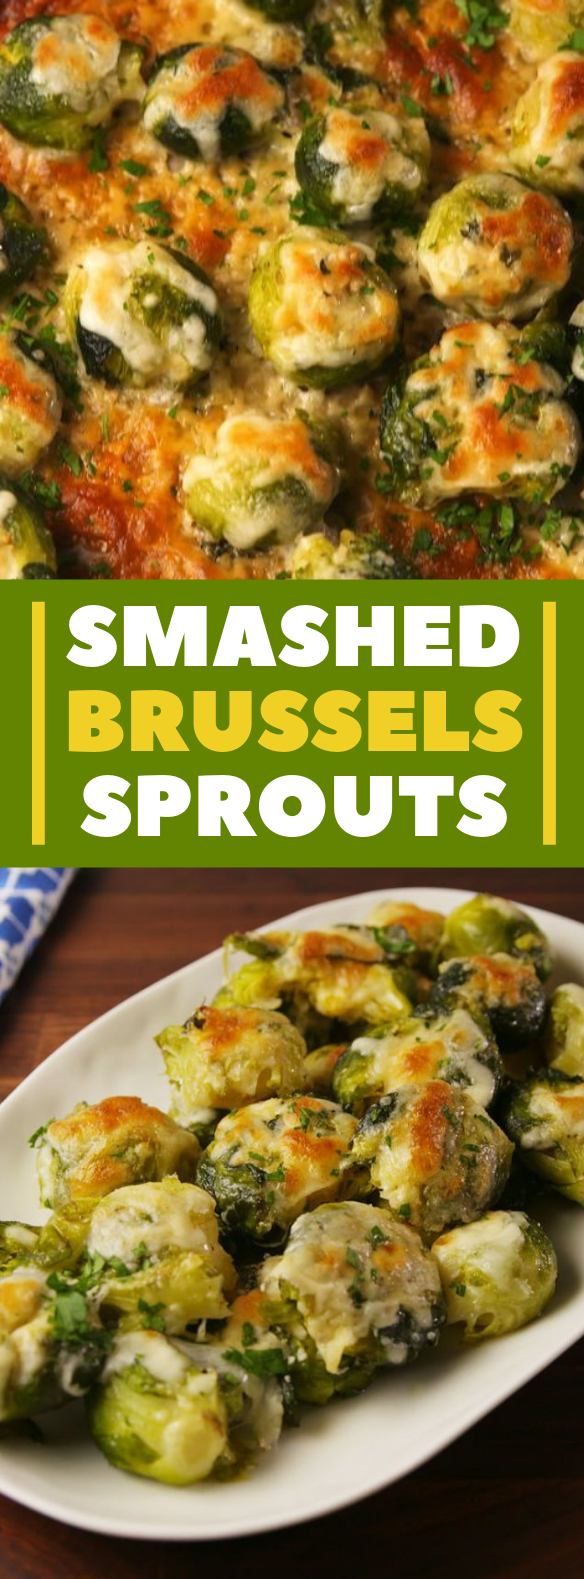 Smashed Brussels Sprouts #veggies #vegetables